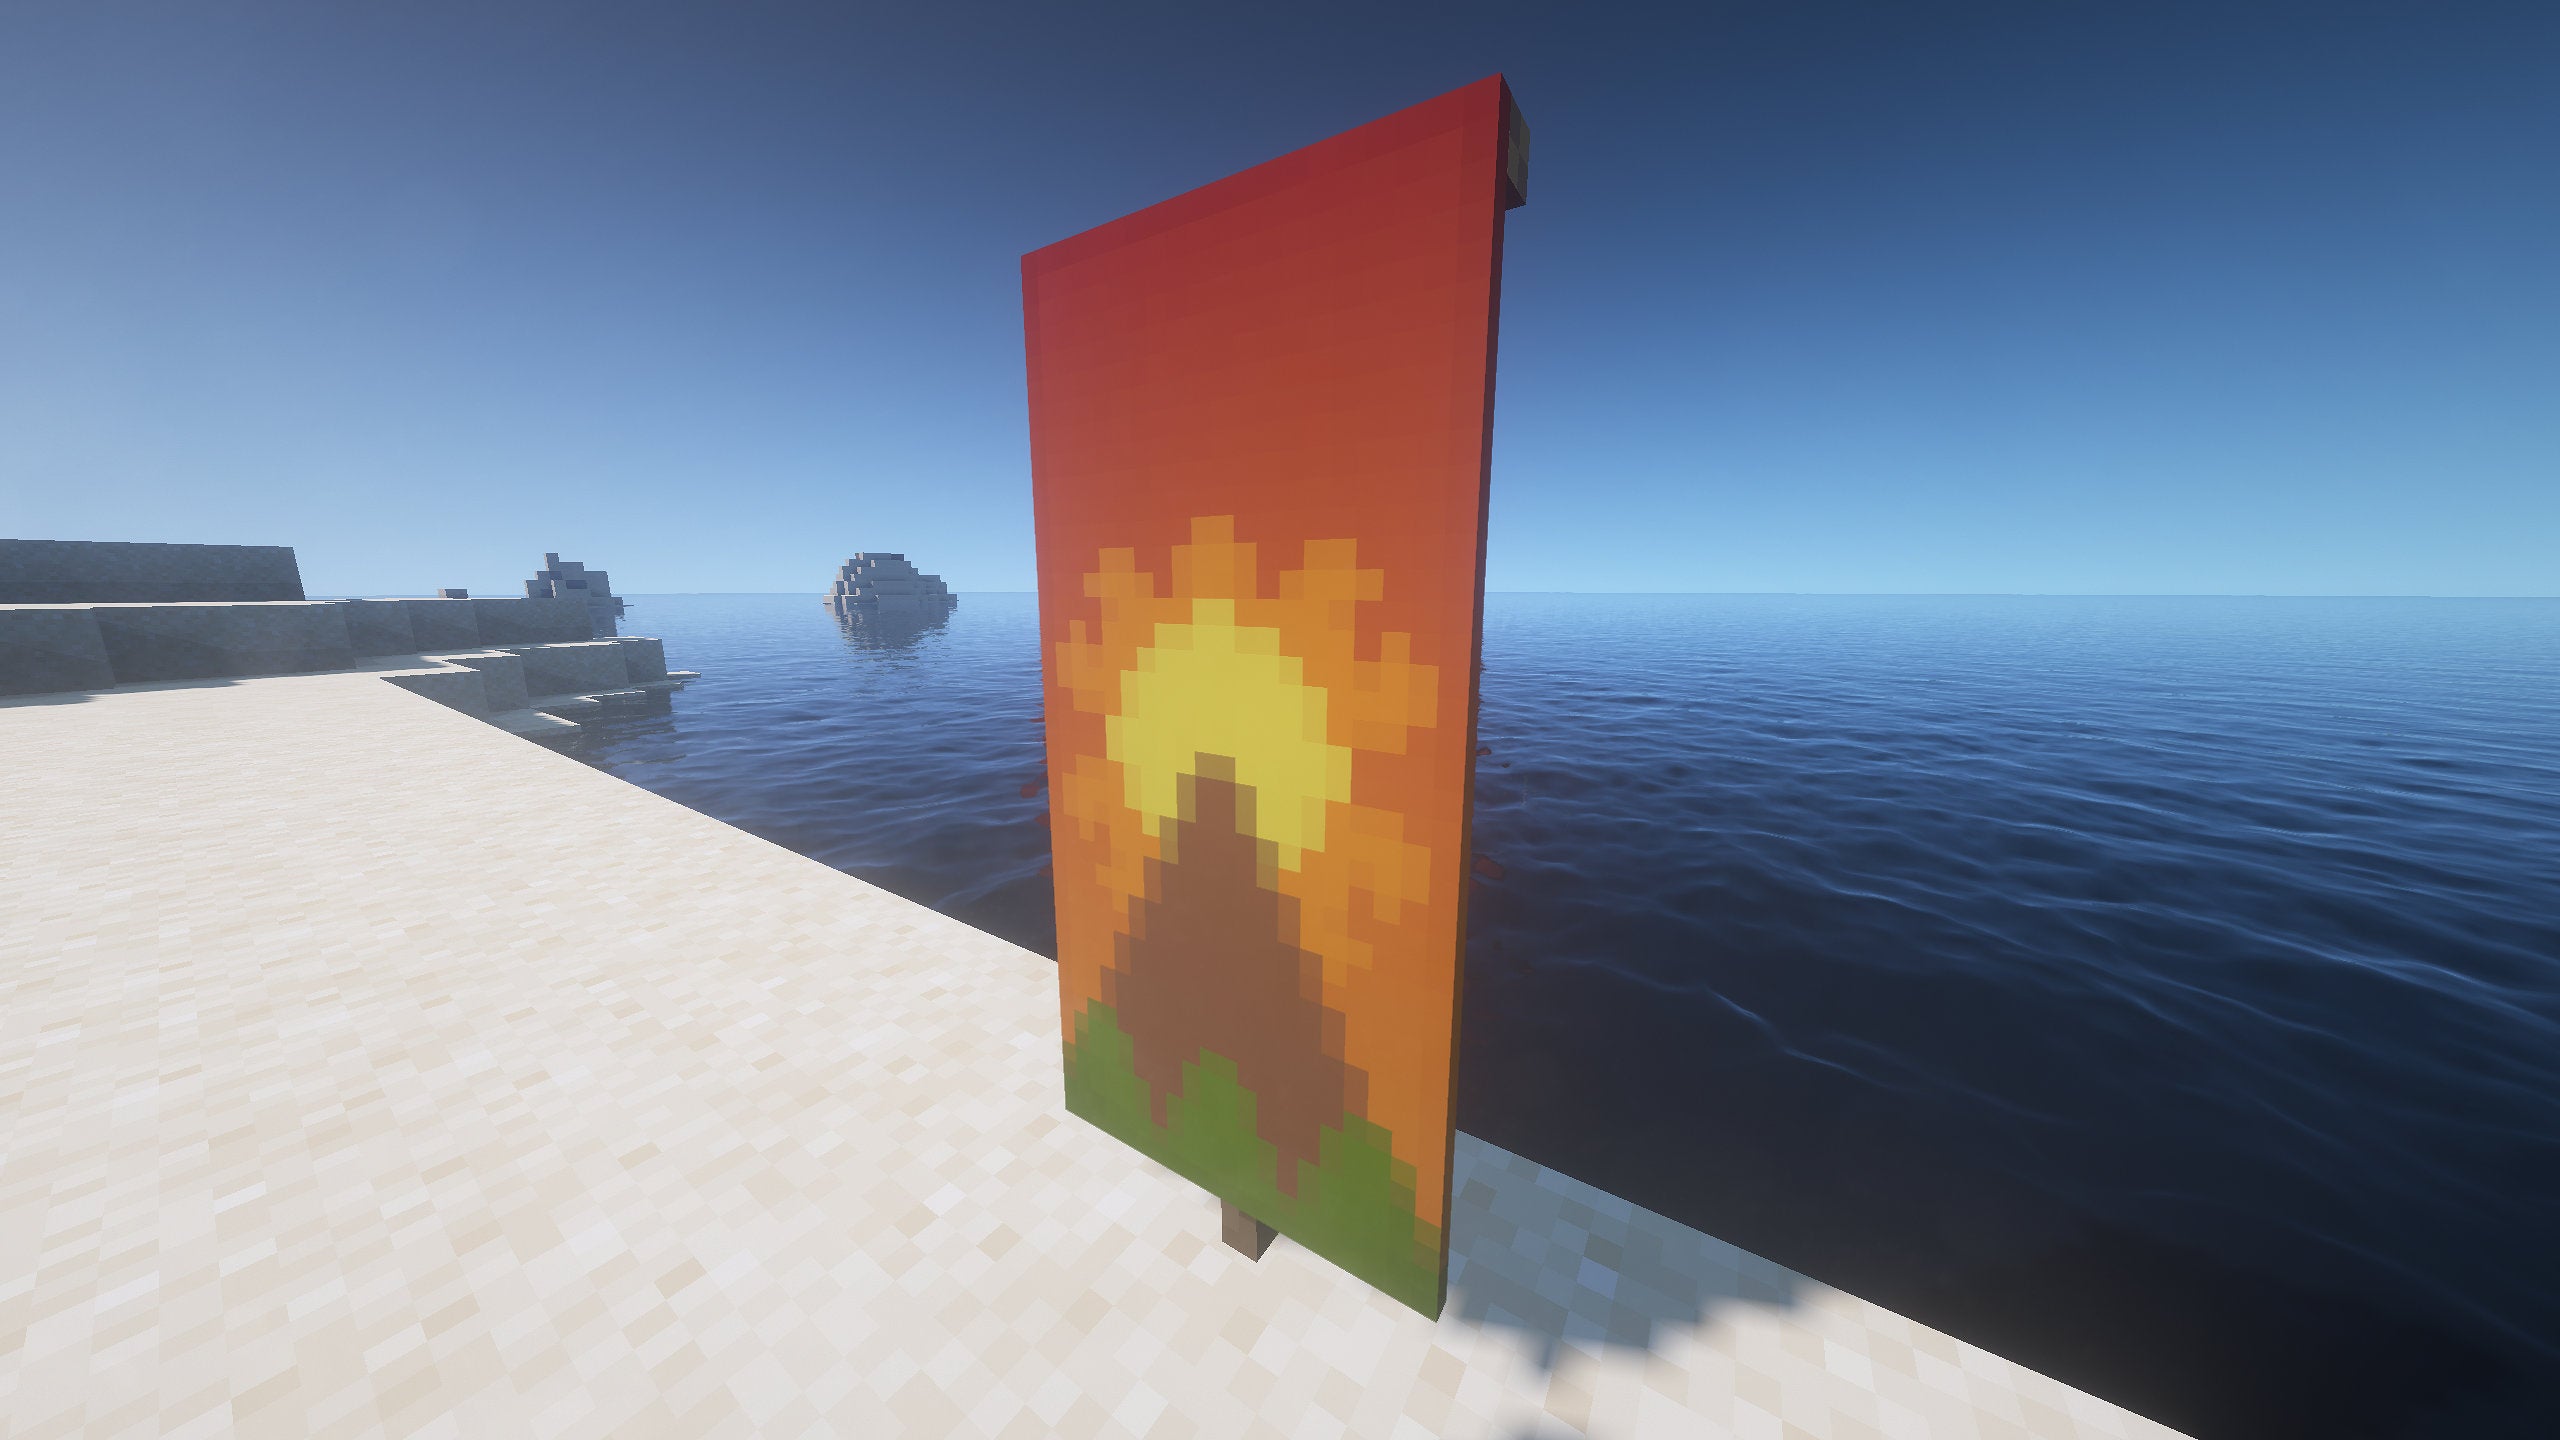 A mountain Banner in Minecraft, placed in the ground by the coast.